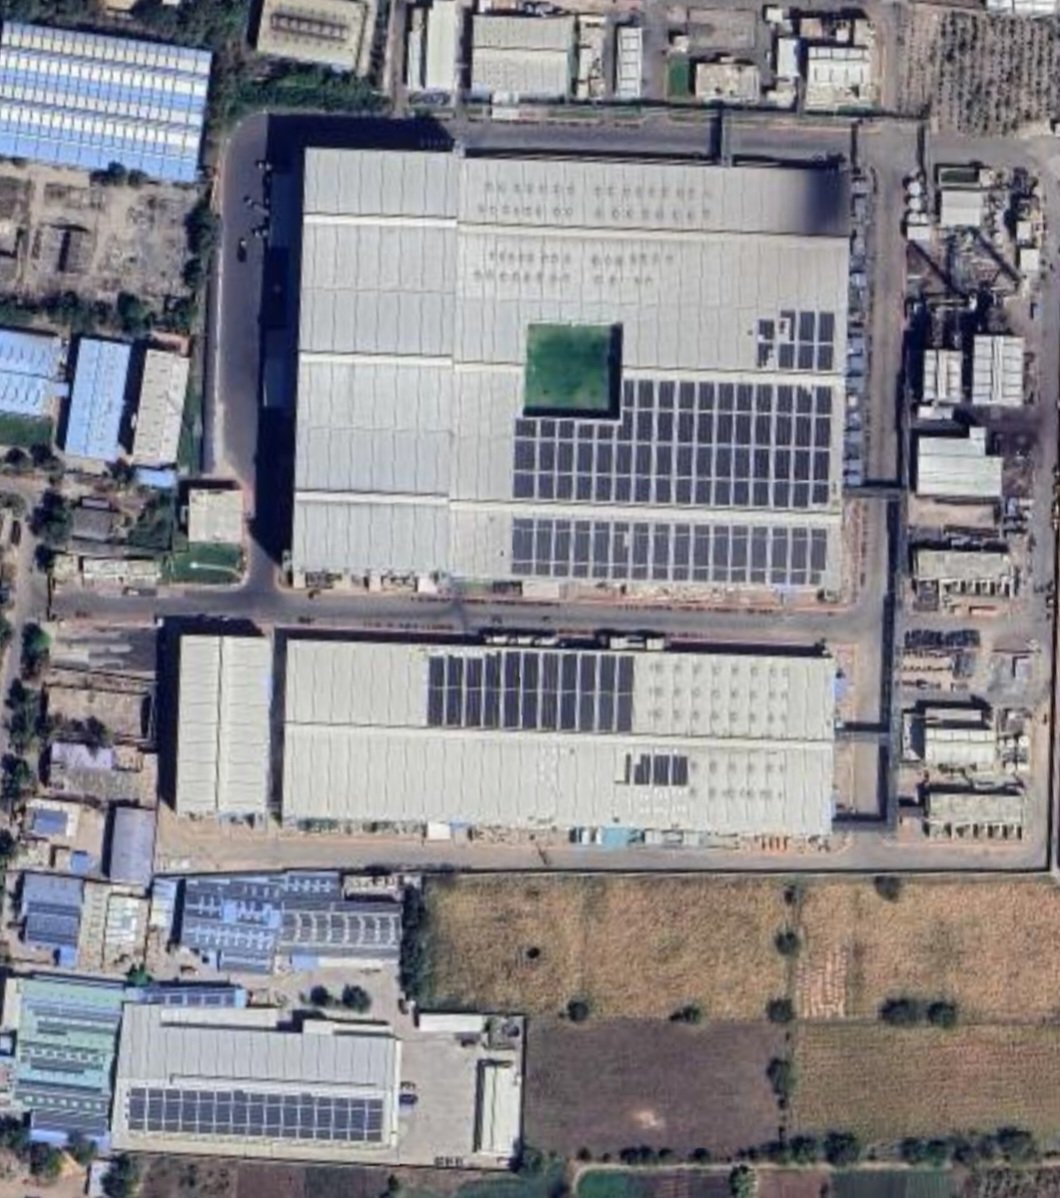 Factories of Maharashtra #Fo_MH

Balkrishna Industries Ltd.
Tyres ( BKT )

MIDC Waluj, Chhatrapati Sambhajinagar

Land Area : 22 acres
Investment : 450 Cr
Annual Capacity : 30,000 MT

BKT has two plants in Waluj MIDC. The first was set up in 1987 and the second New plant in 2021